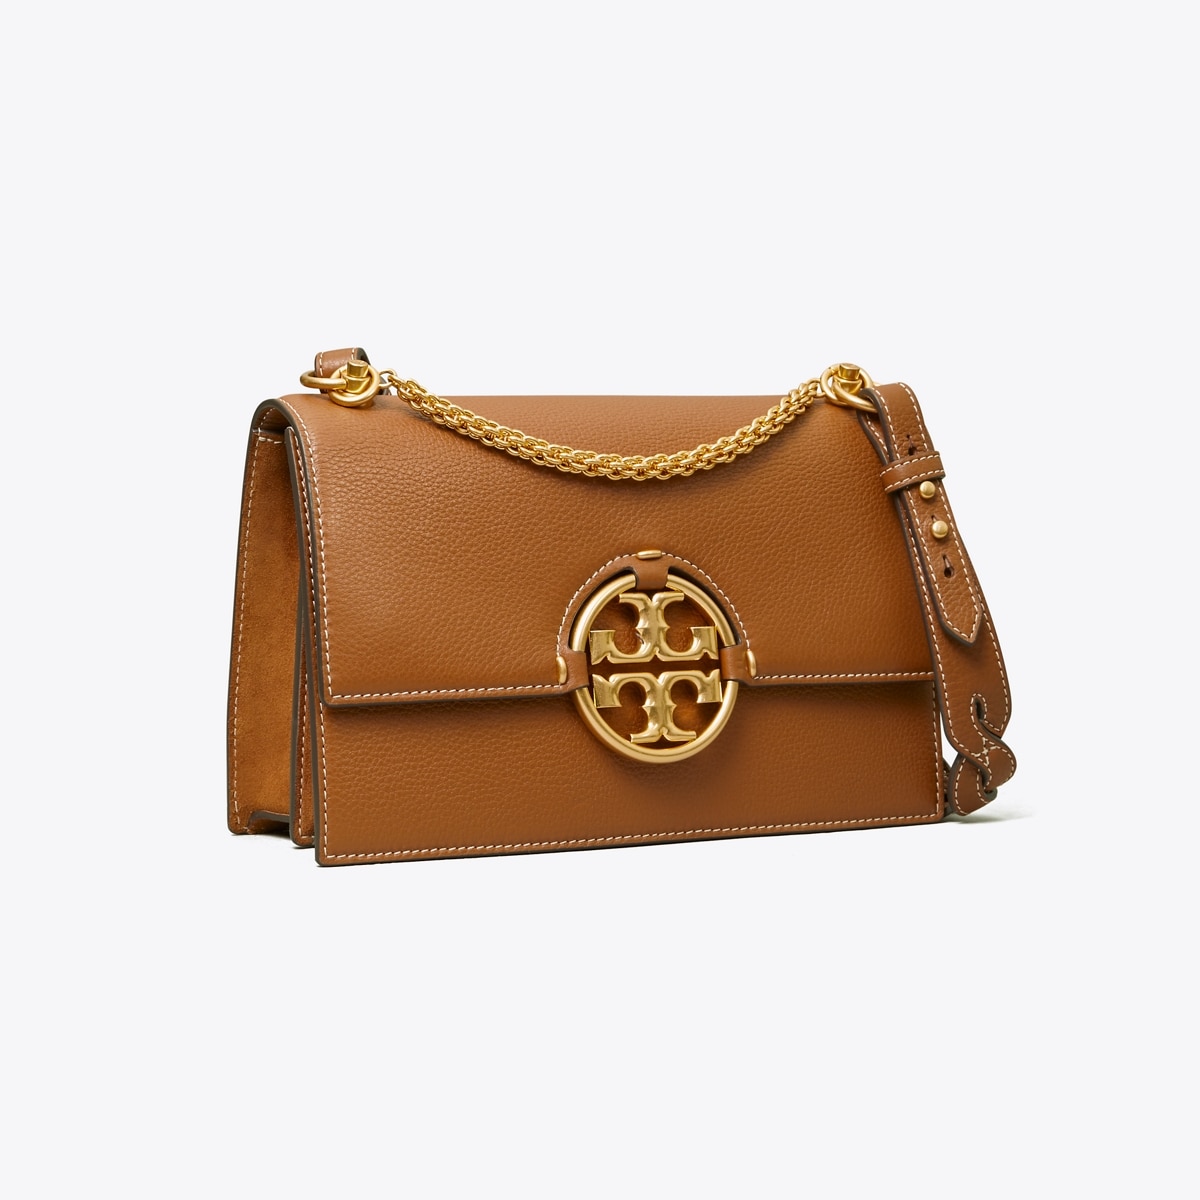 TORY BURCH MINI MILLER LEATHER BAG WITH LOGO Spring/Summer 23